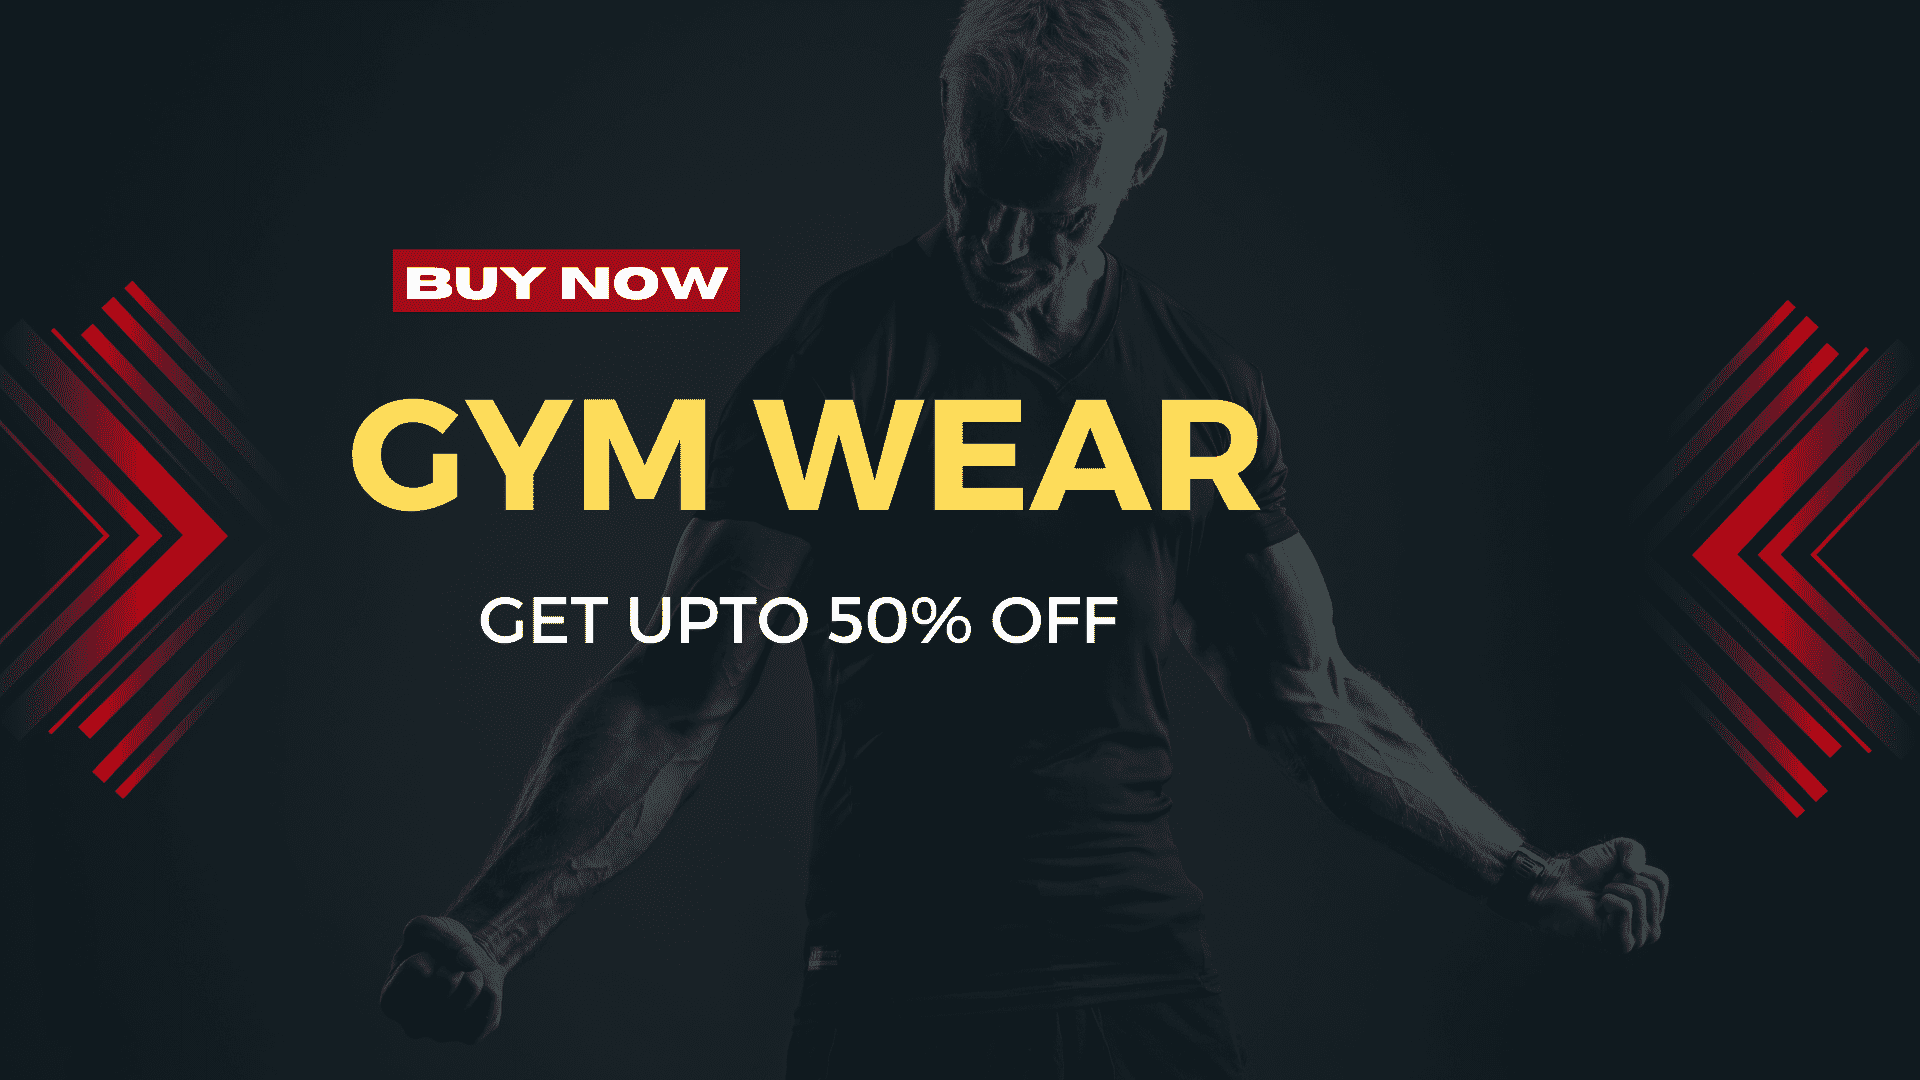 BUY GYM WEAR CLOTHES FROM CLOTHSZILLA AT 50%OFF